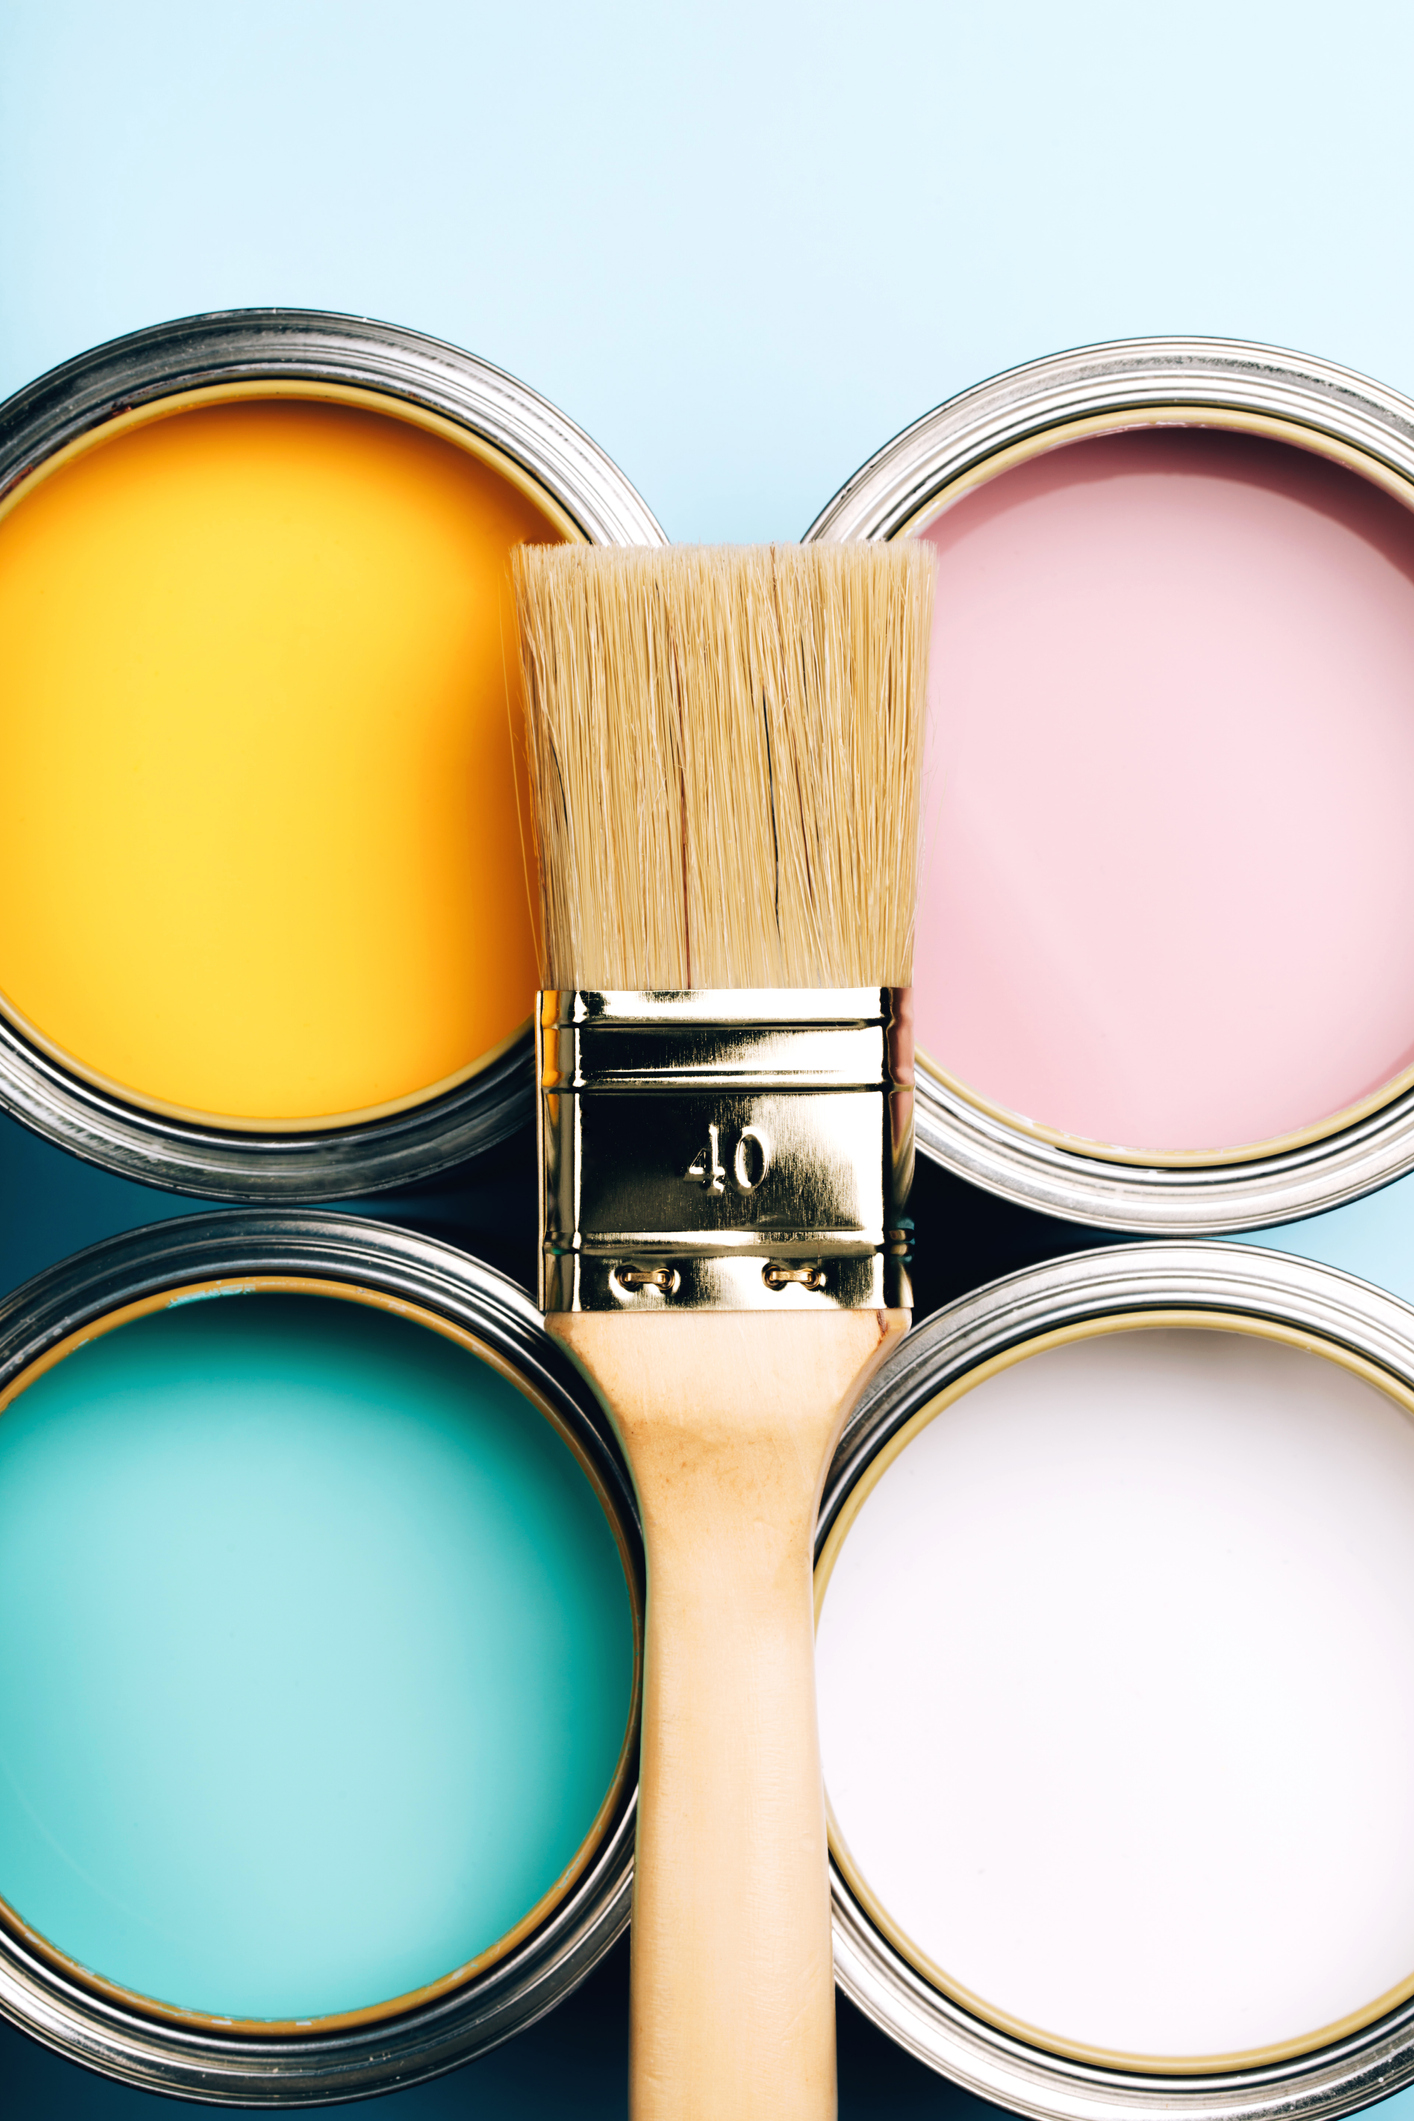 A wooden handle brush on open cans and on a blue pastel background.